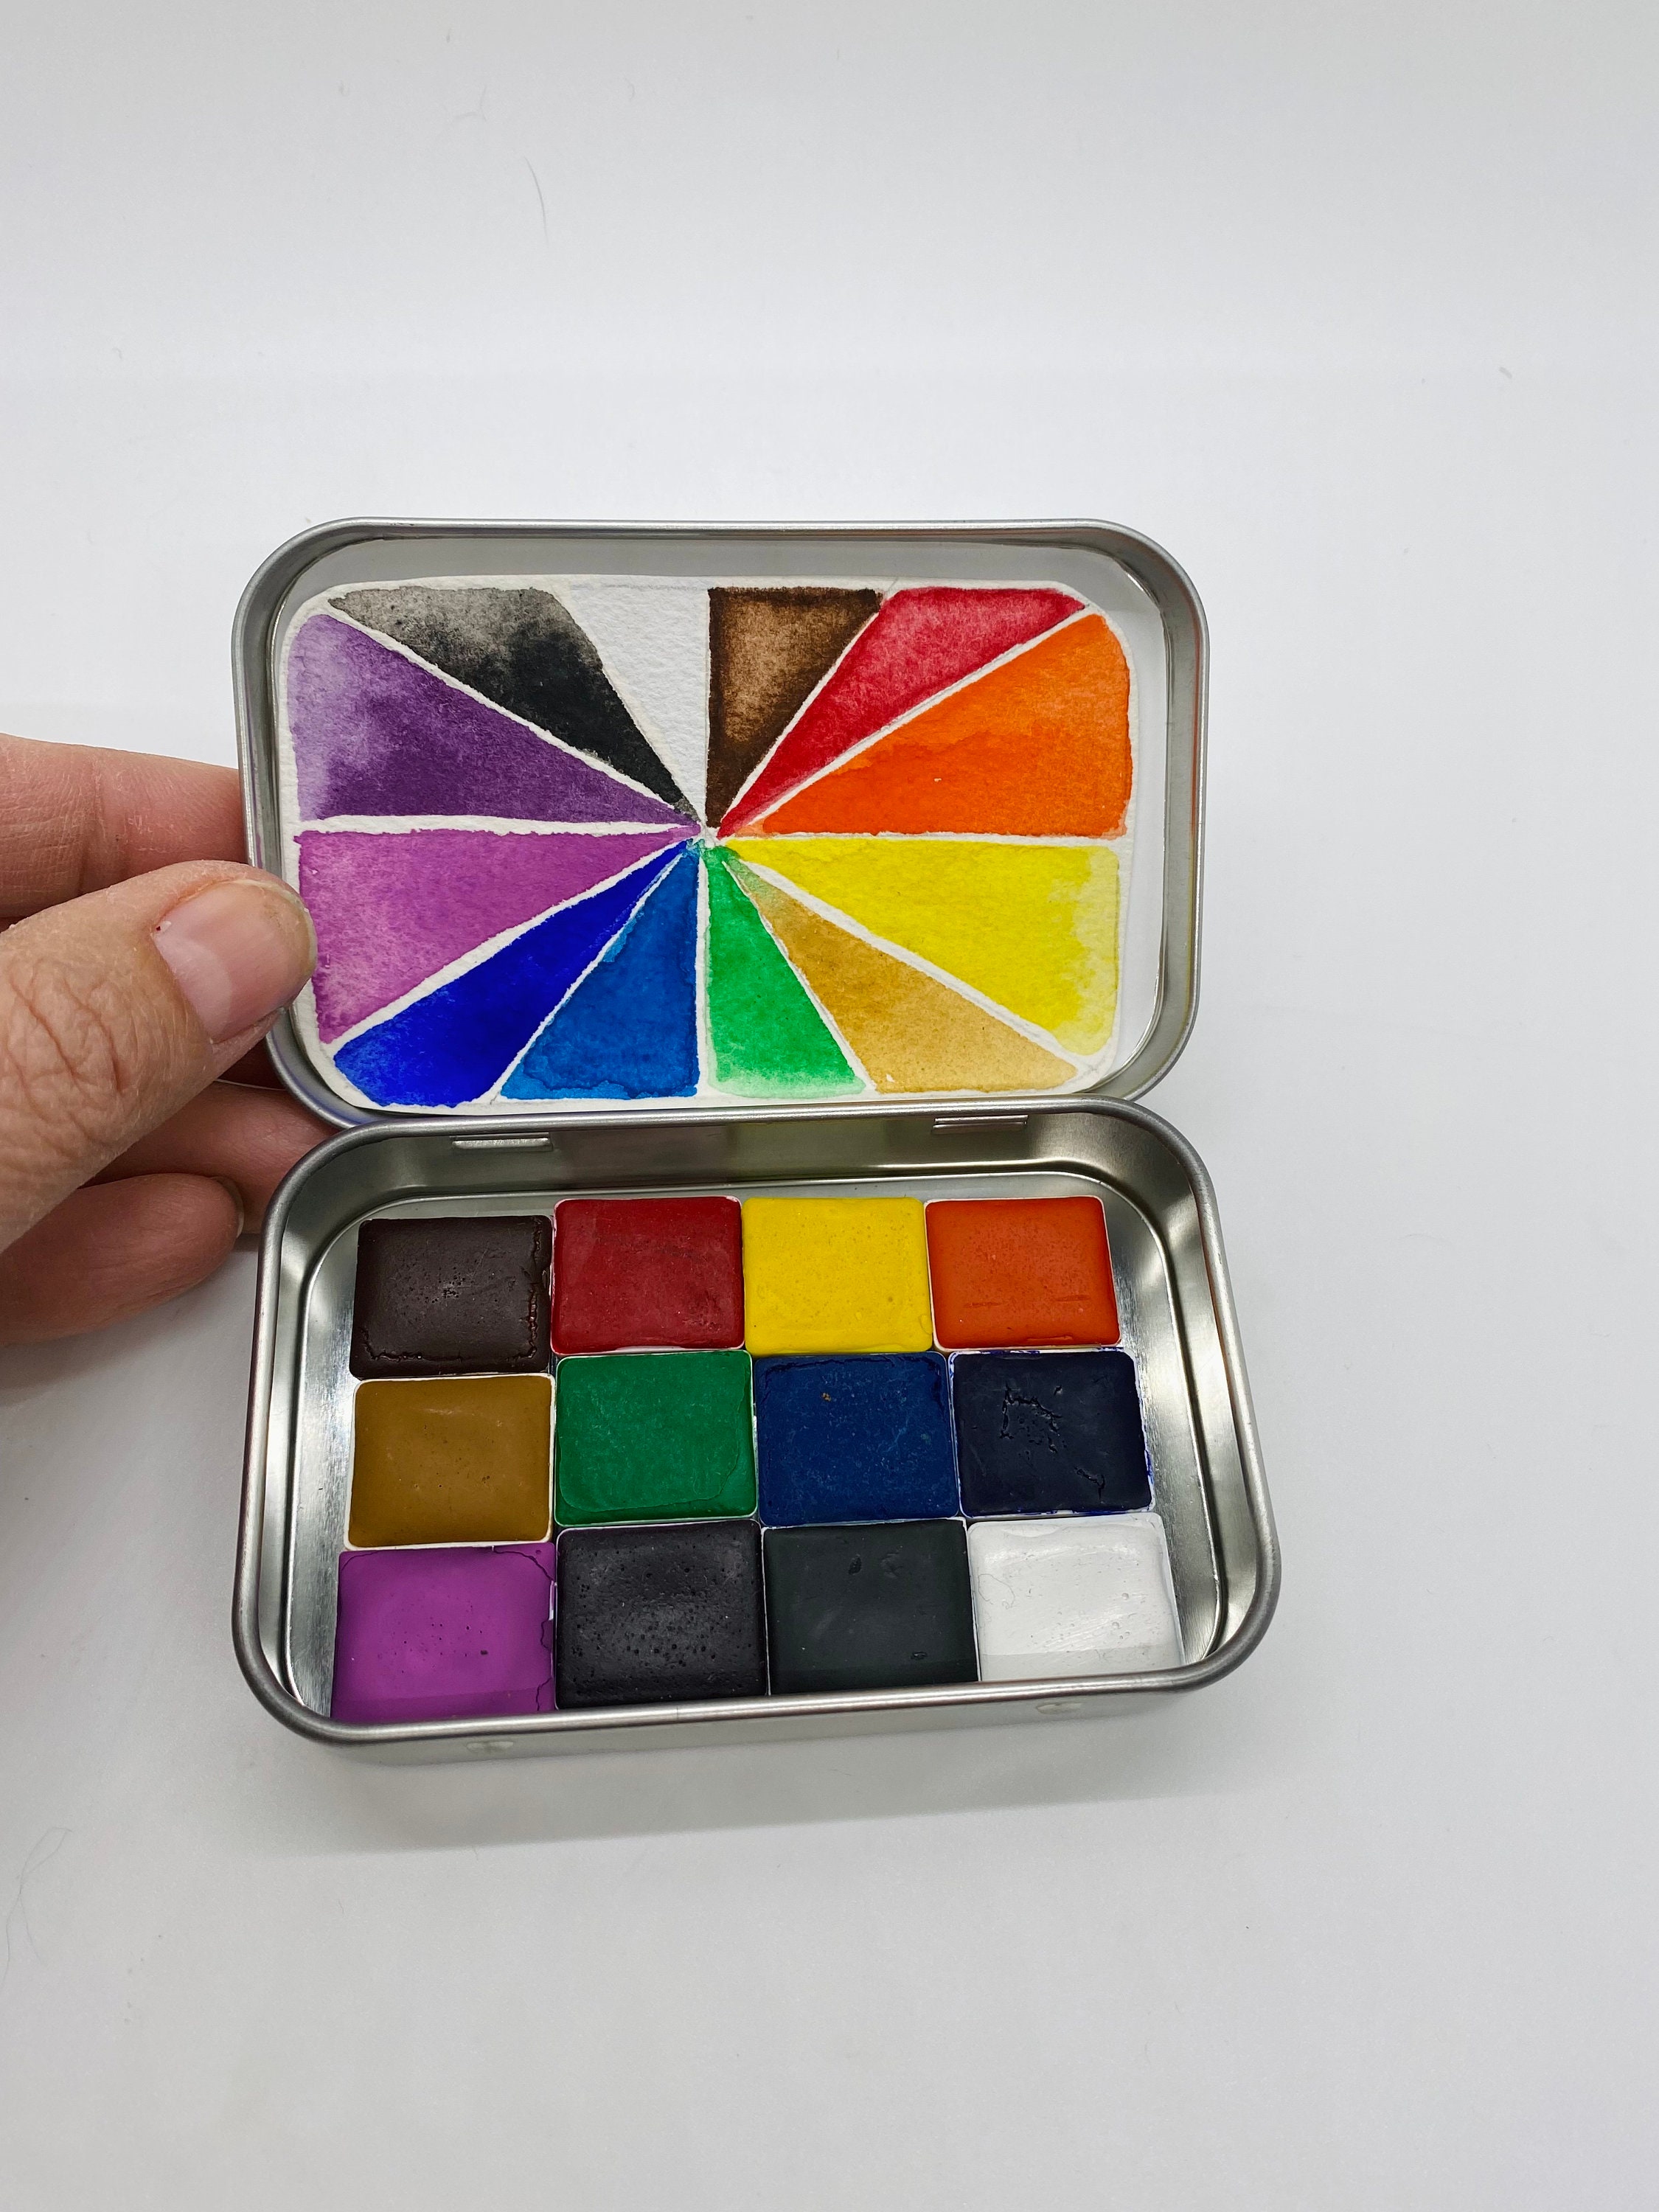 Buy in BULK packs of 50 or 100 Watercolor Paint Pans High Grade Plastic in  Half and Whole Sizes (NOT made in China)